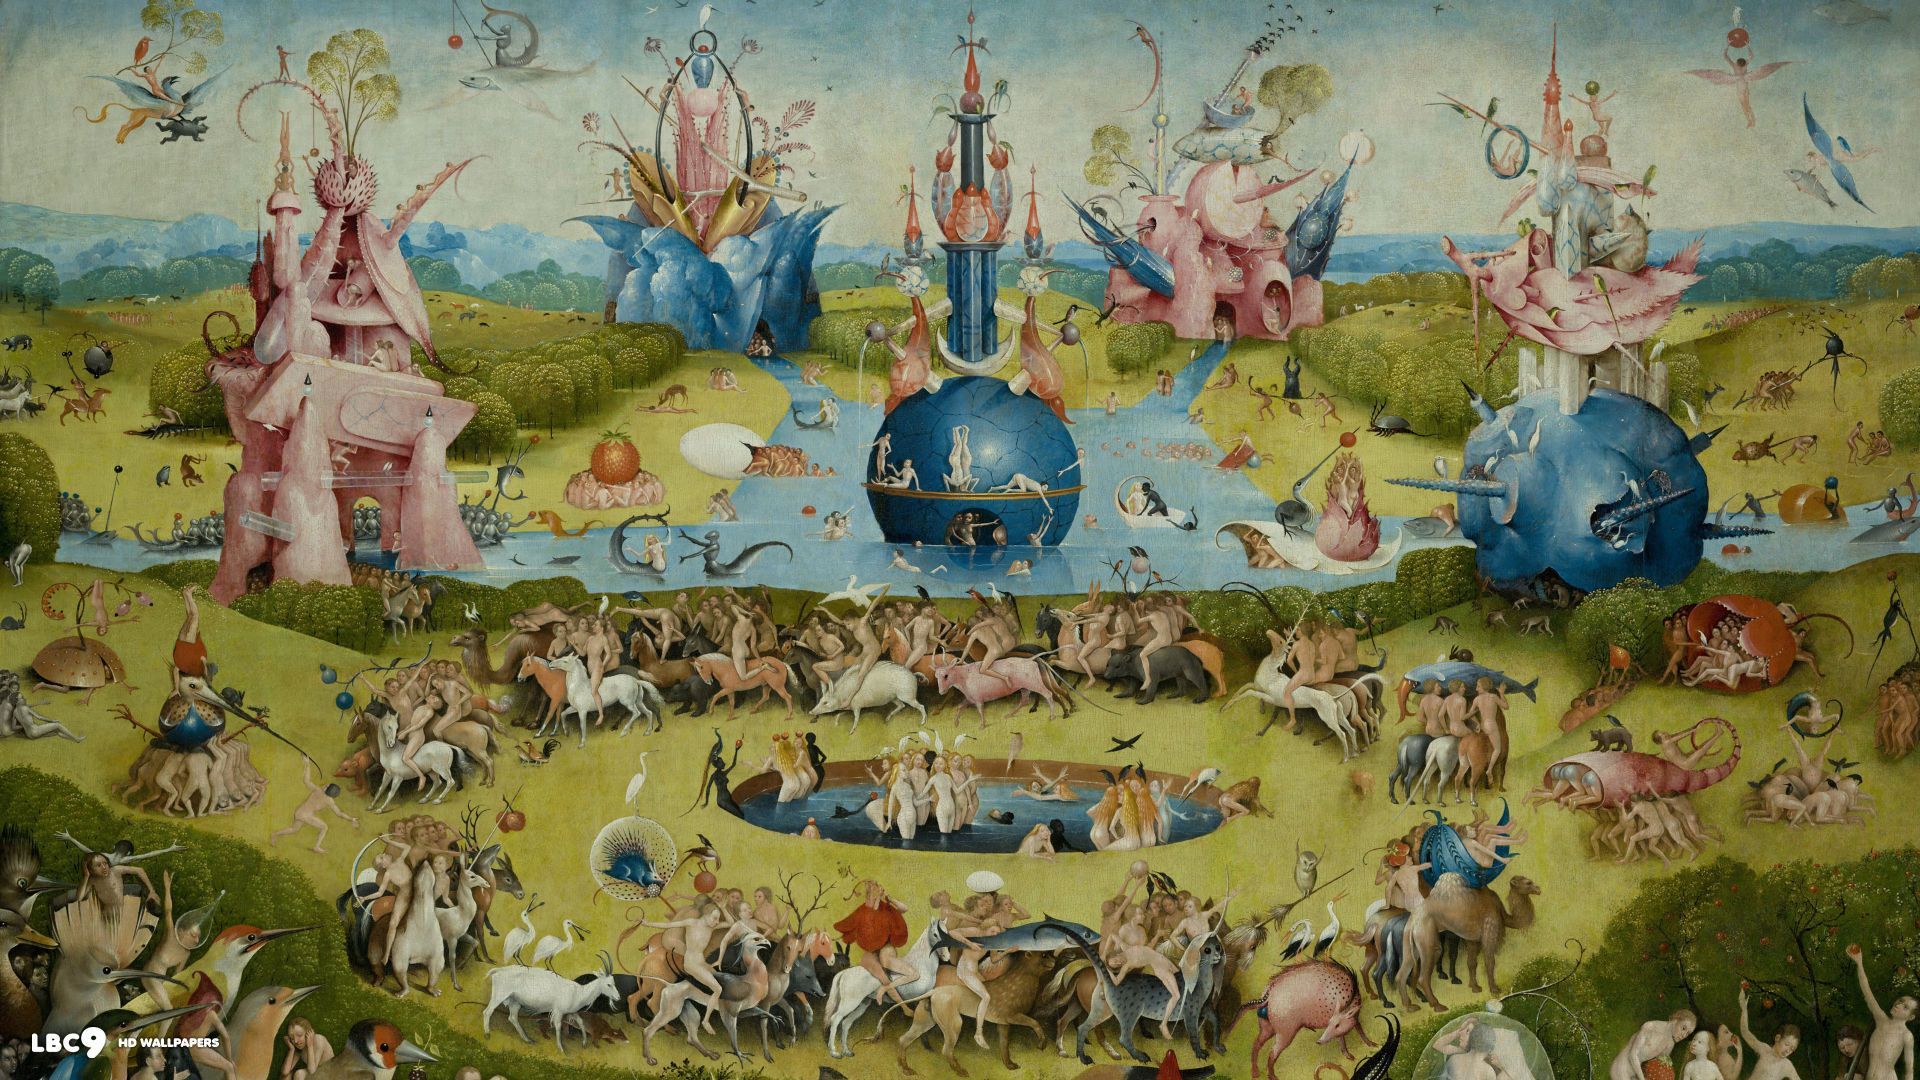 hieronymus bosch wallpaper and paintings HD background. Hieronymus bosch, Garden of earthly delights, Hieronymous bosch